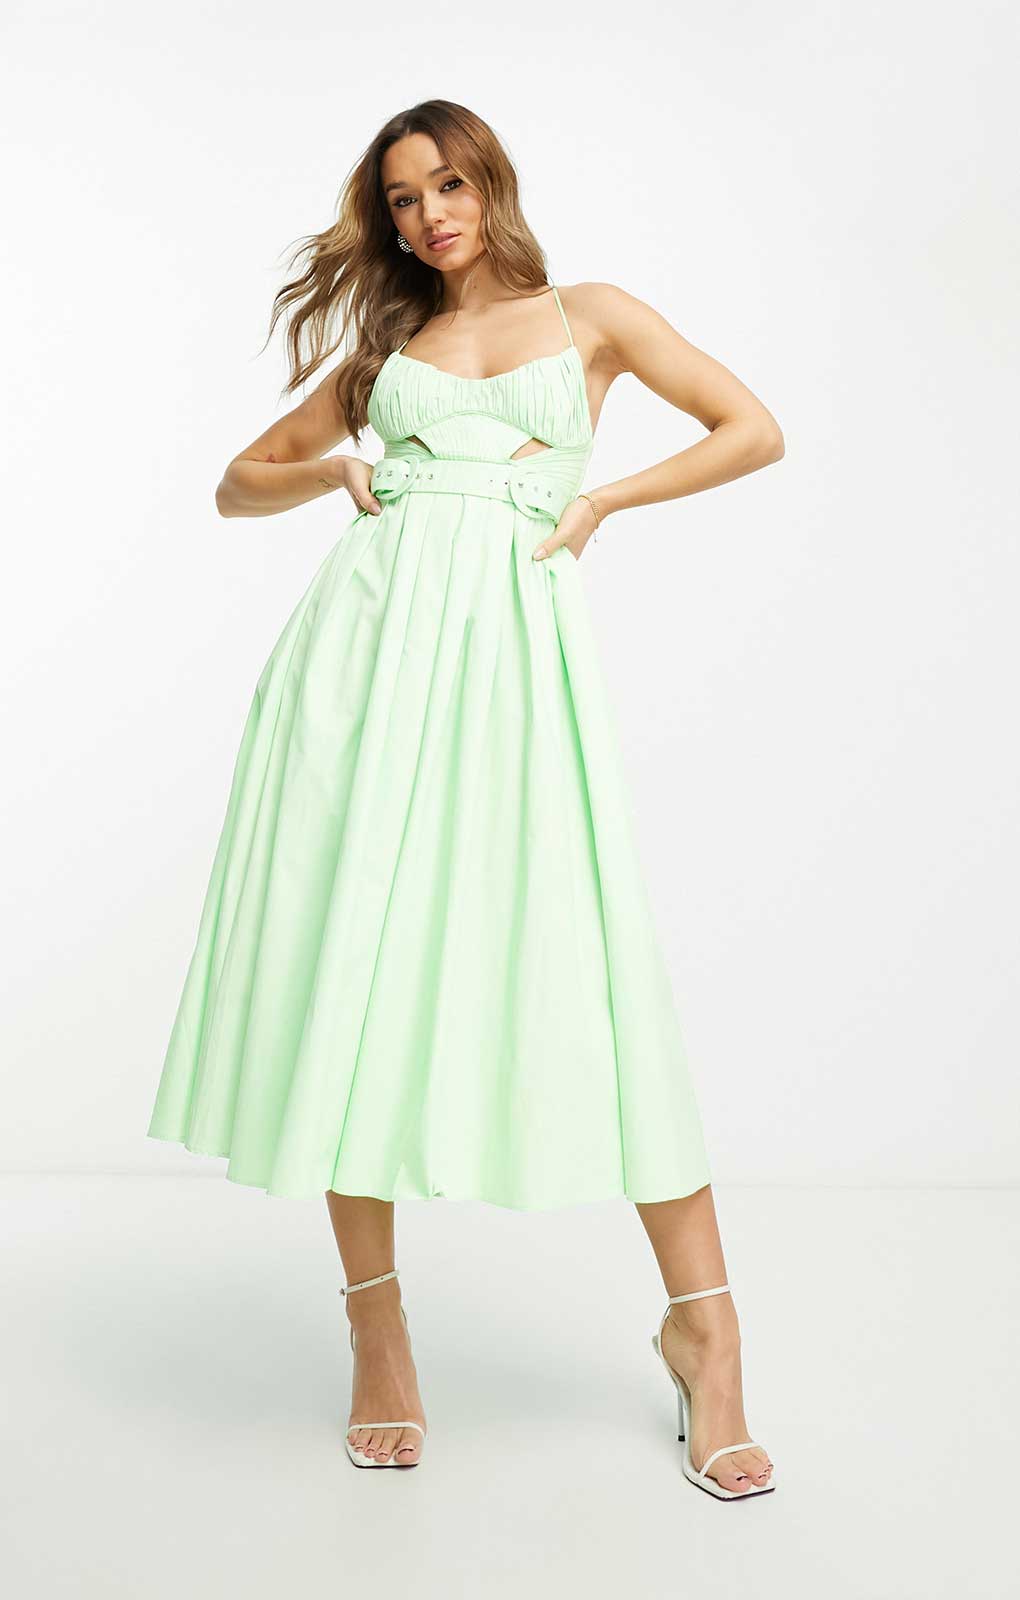 Asos Design Cotton Cut Out Pleat Detail Midi Dress With Belt In Lime Green product image